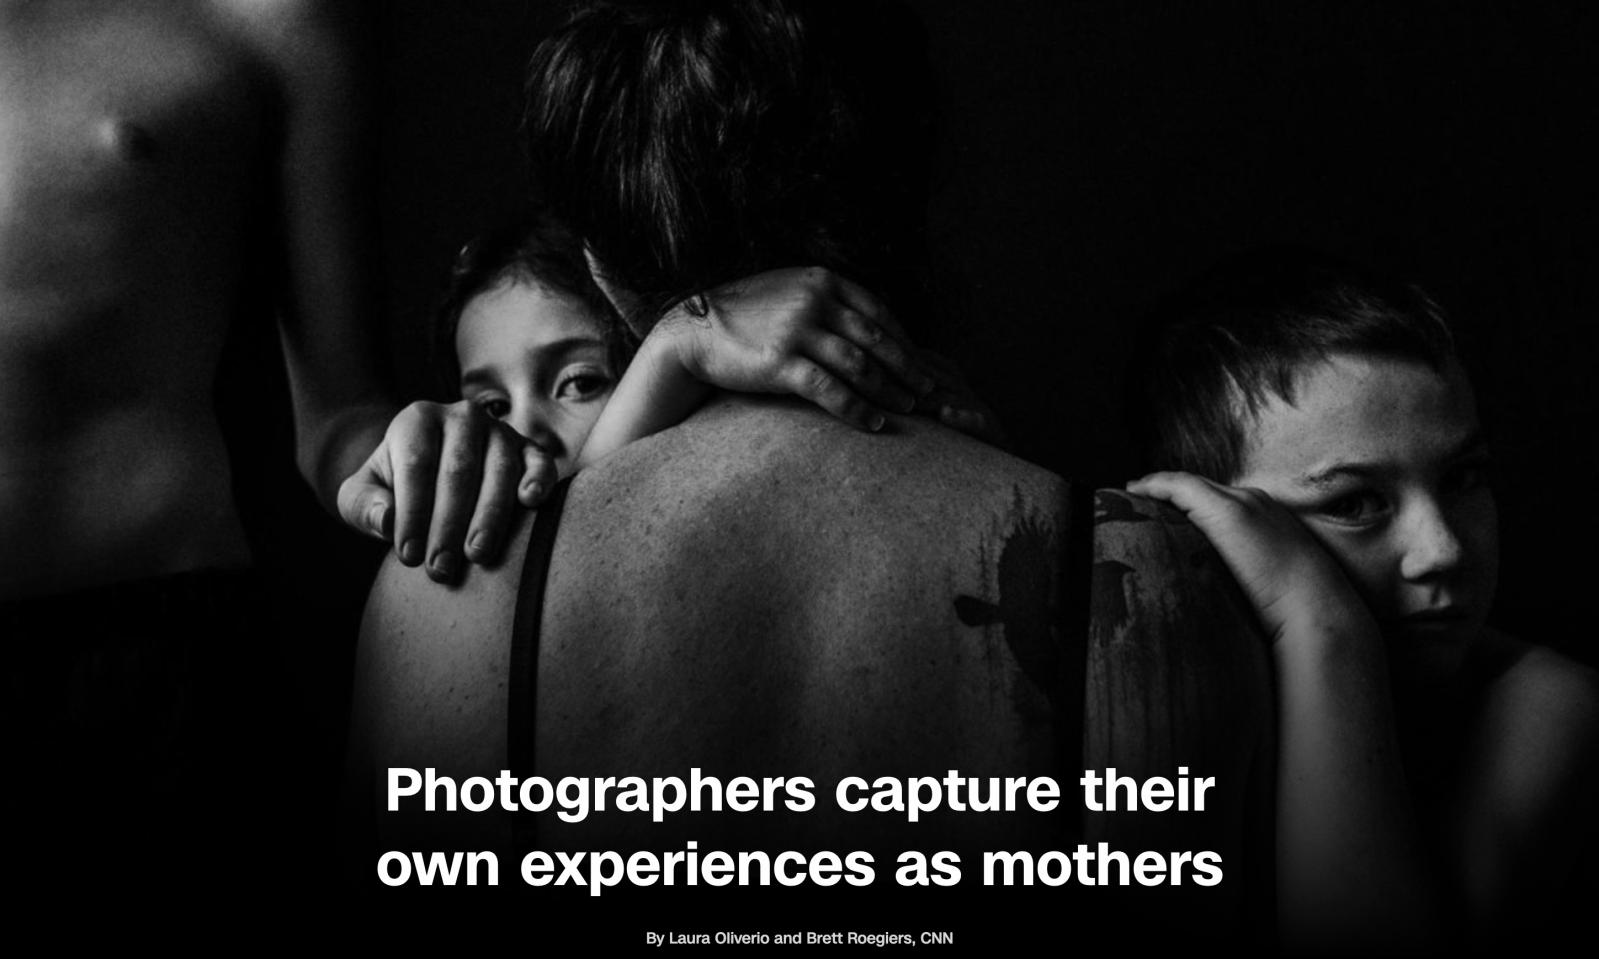 CNN Mother's Day Feature